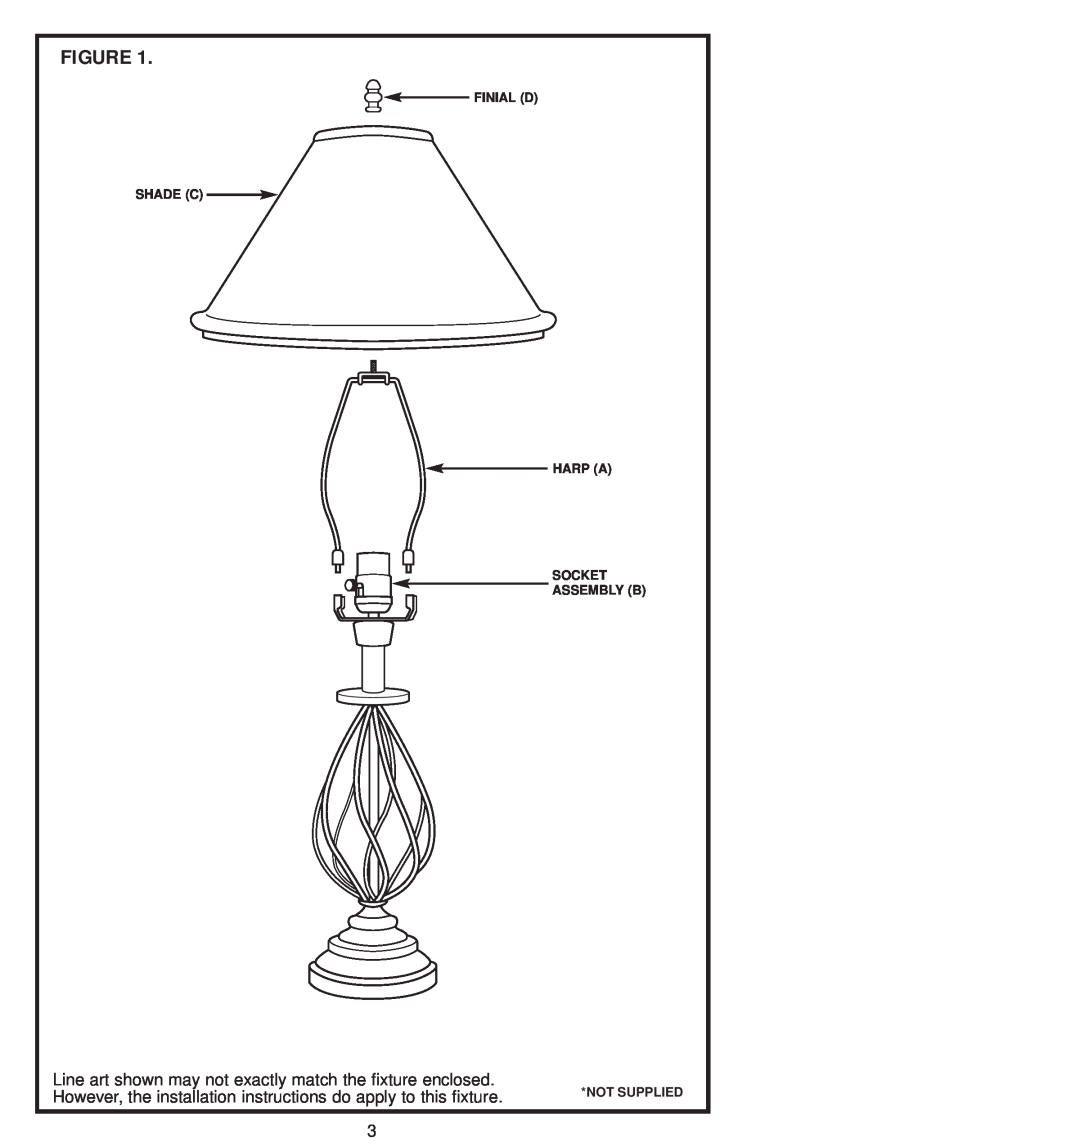 Westinghouse W-128 owner manual Finial D Shade C Harp A Socket Assembly B, Not Supplied 